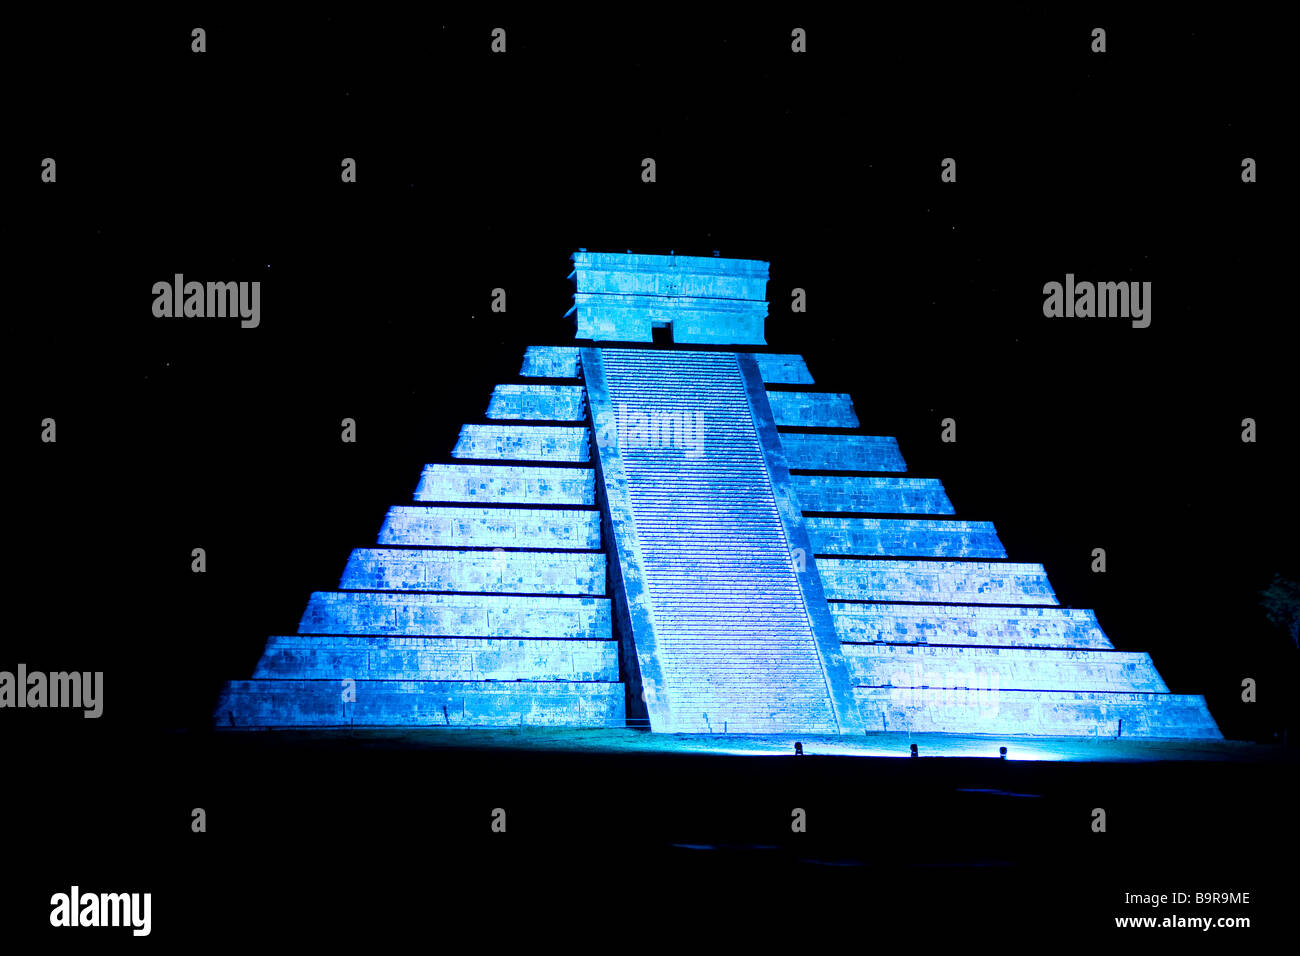 Mexico, Yucatan State, archaeological site of Chichen Itza, classified as World Heritage by UNESCO, son et lumiere display Stock Photo